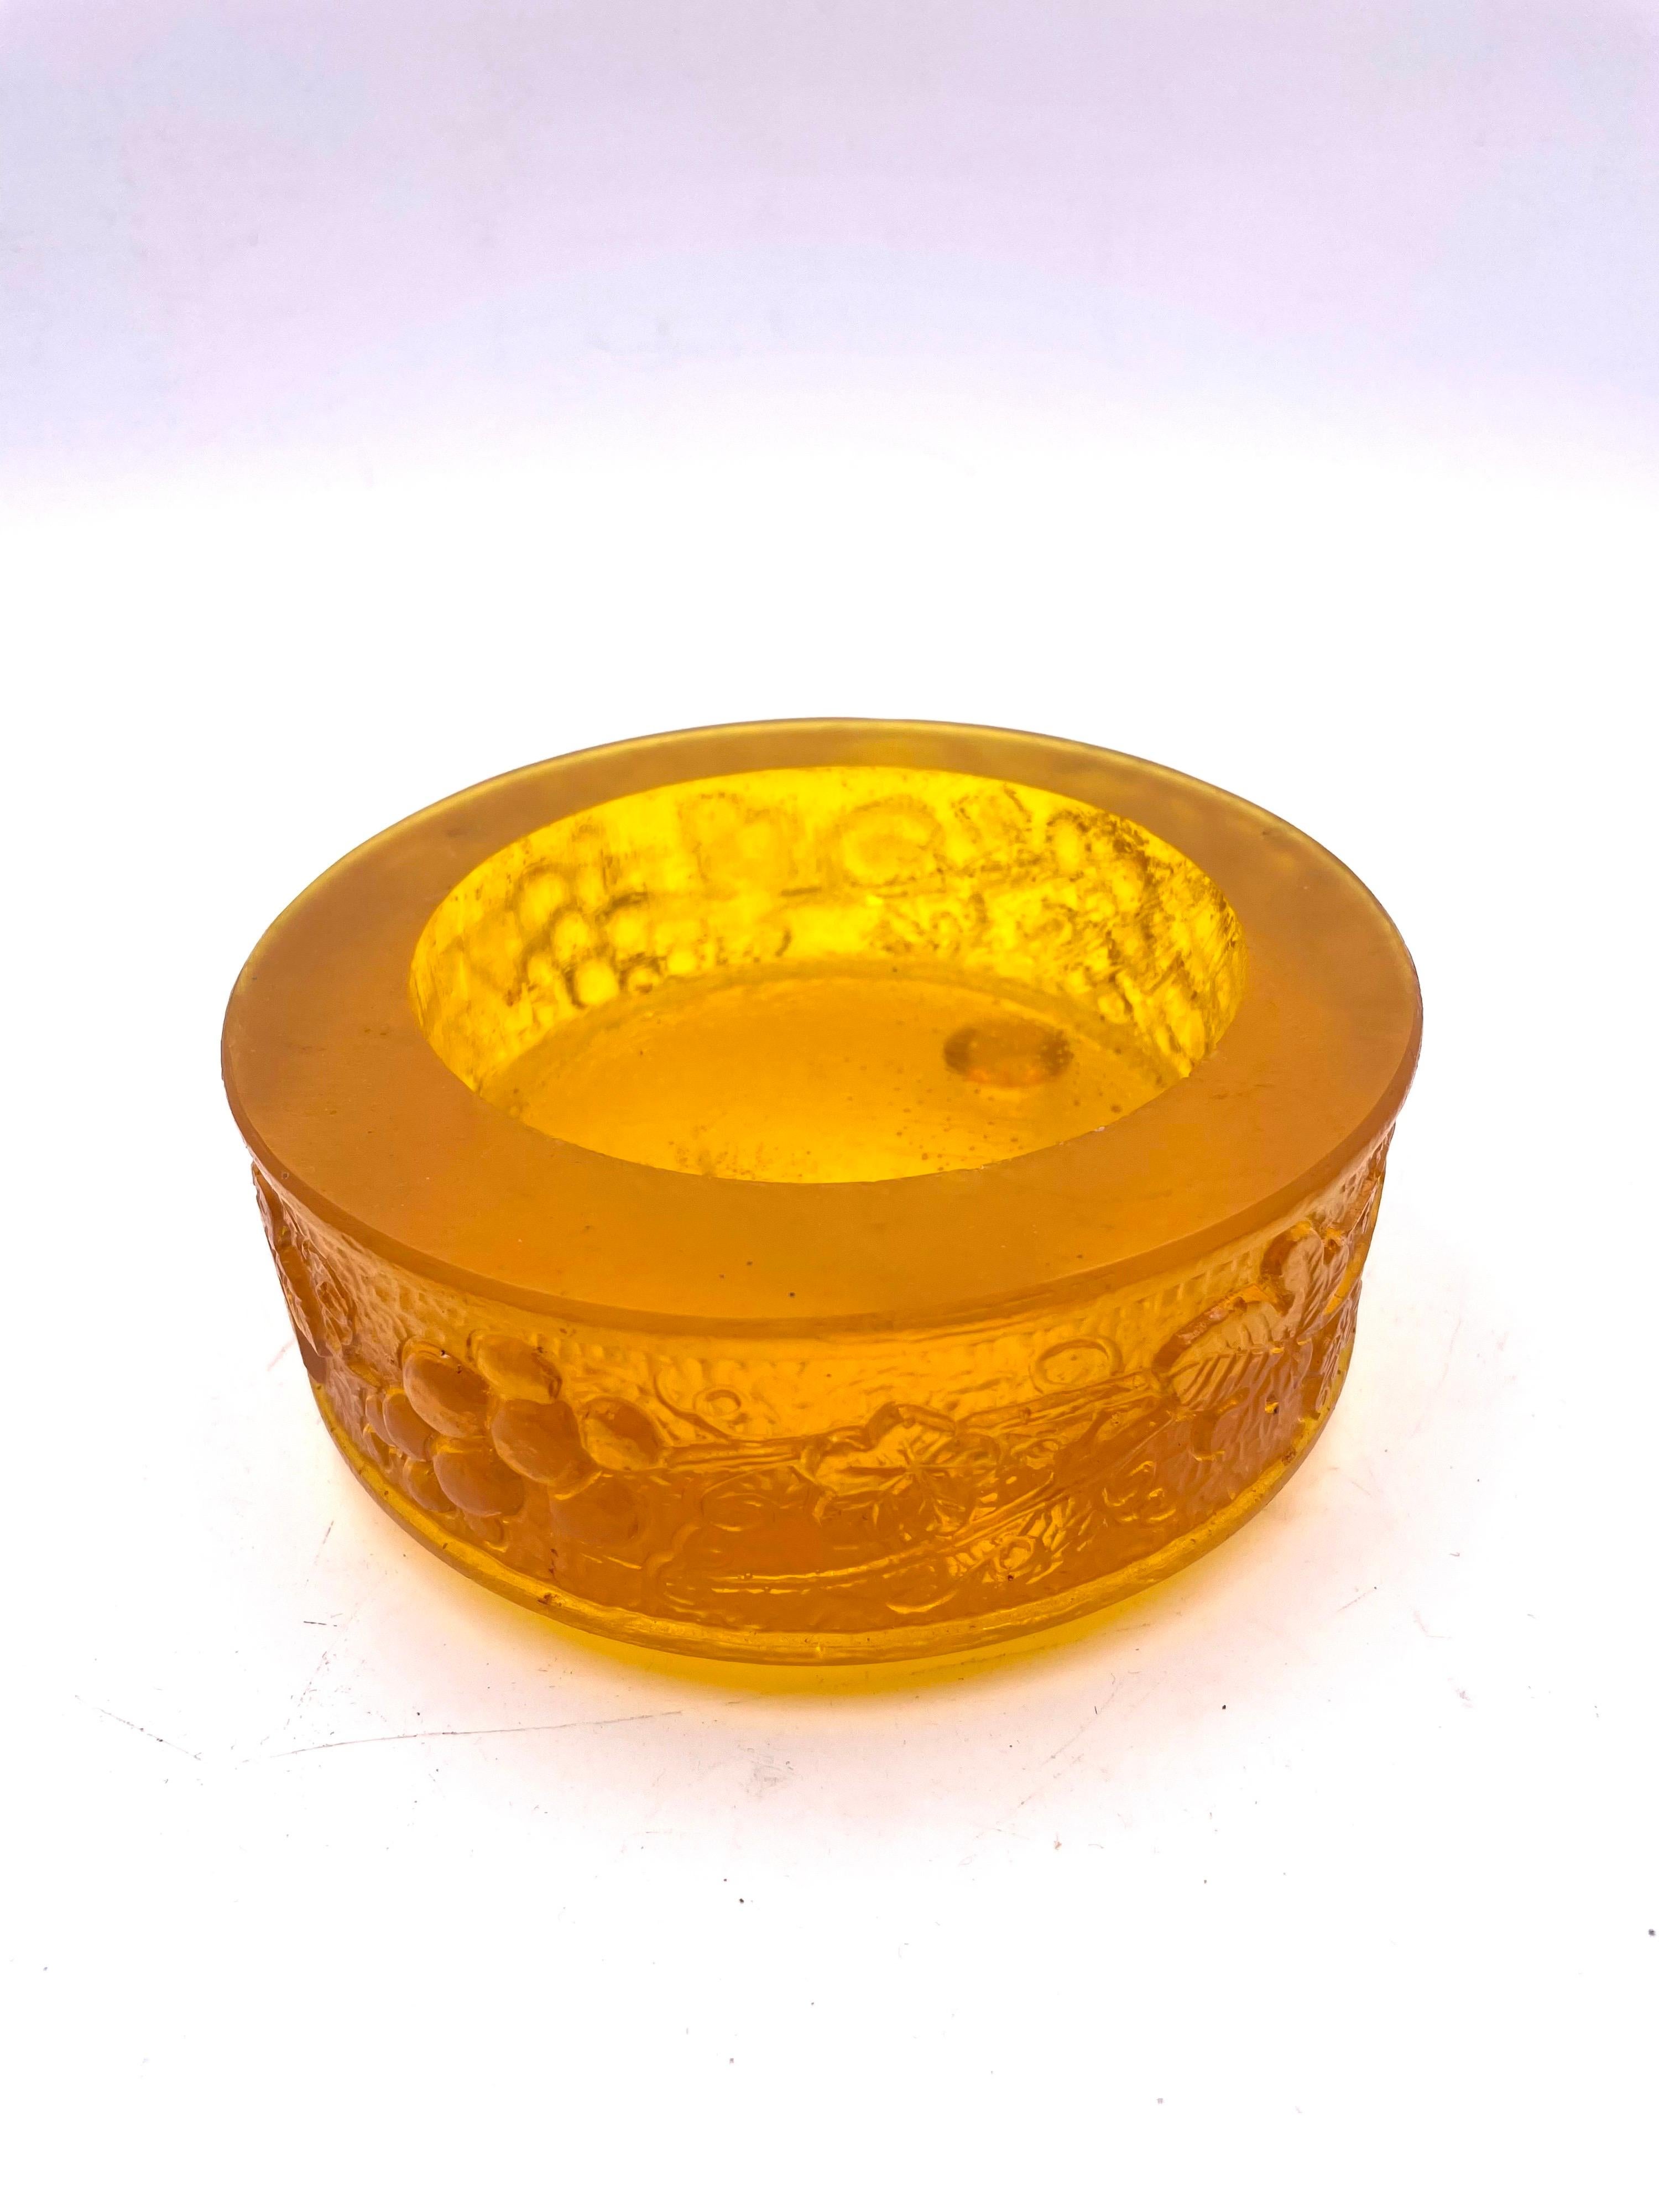 North American Rare Resin Bowl Catch it All by Sascha Brastoff Signed For Sale